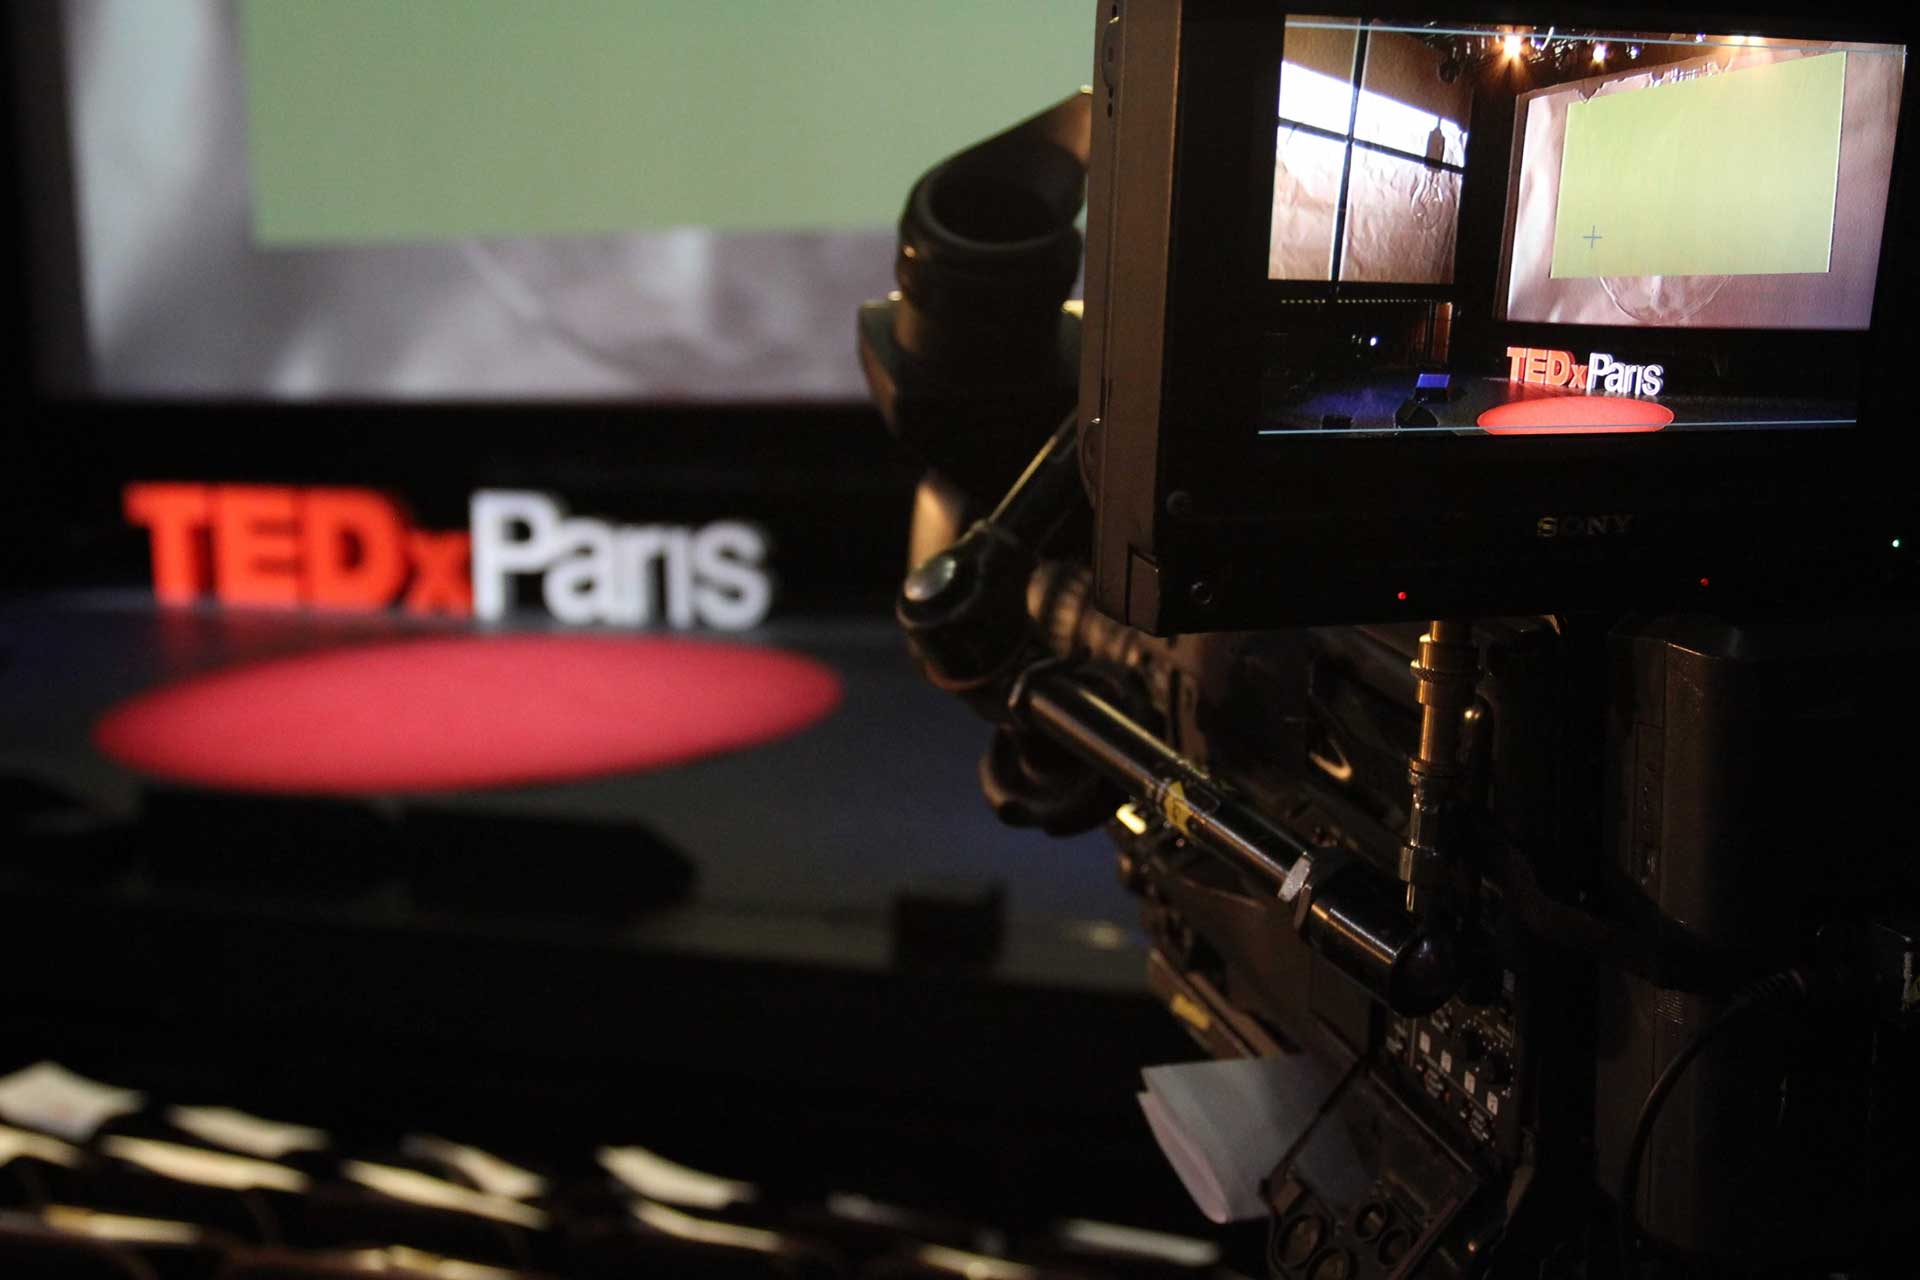 conference-TEDxParis-2013-2.jpg